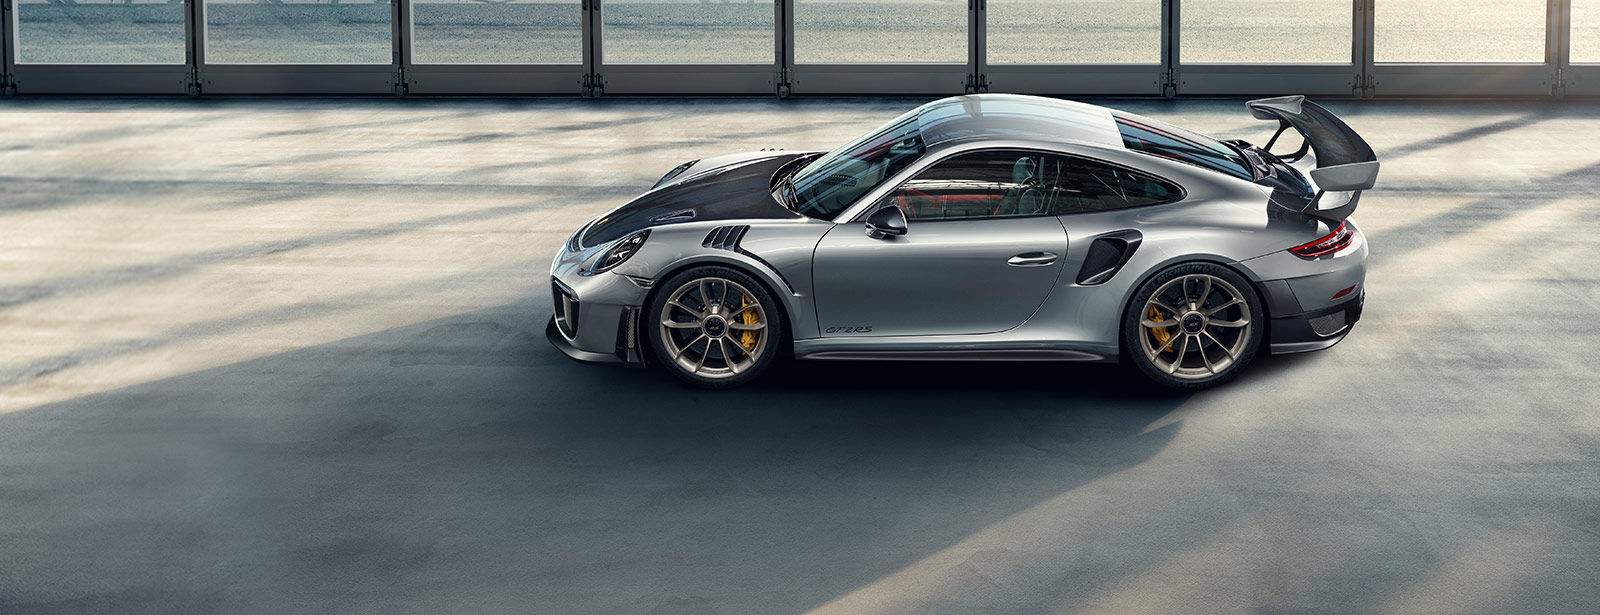 The 2018 Porsche GT2 RS is officially the fastest road car ever